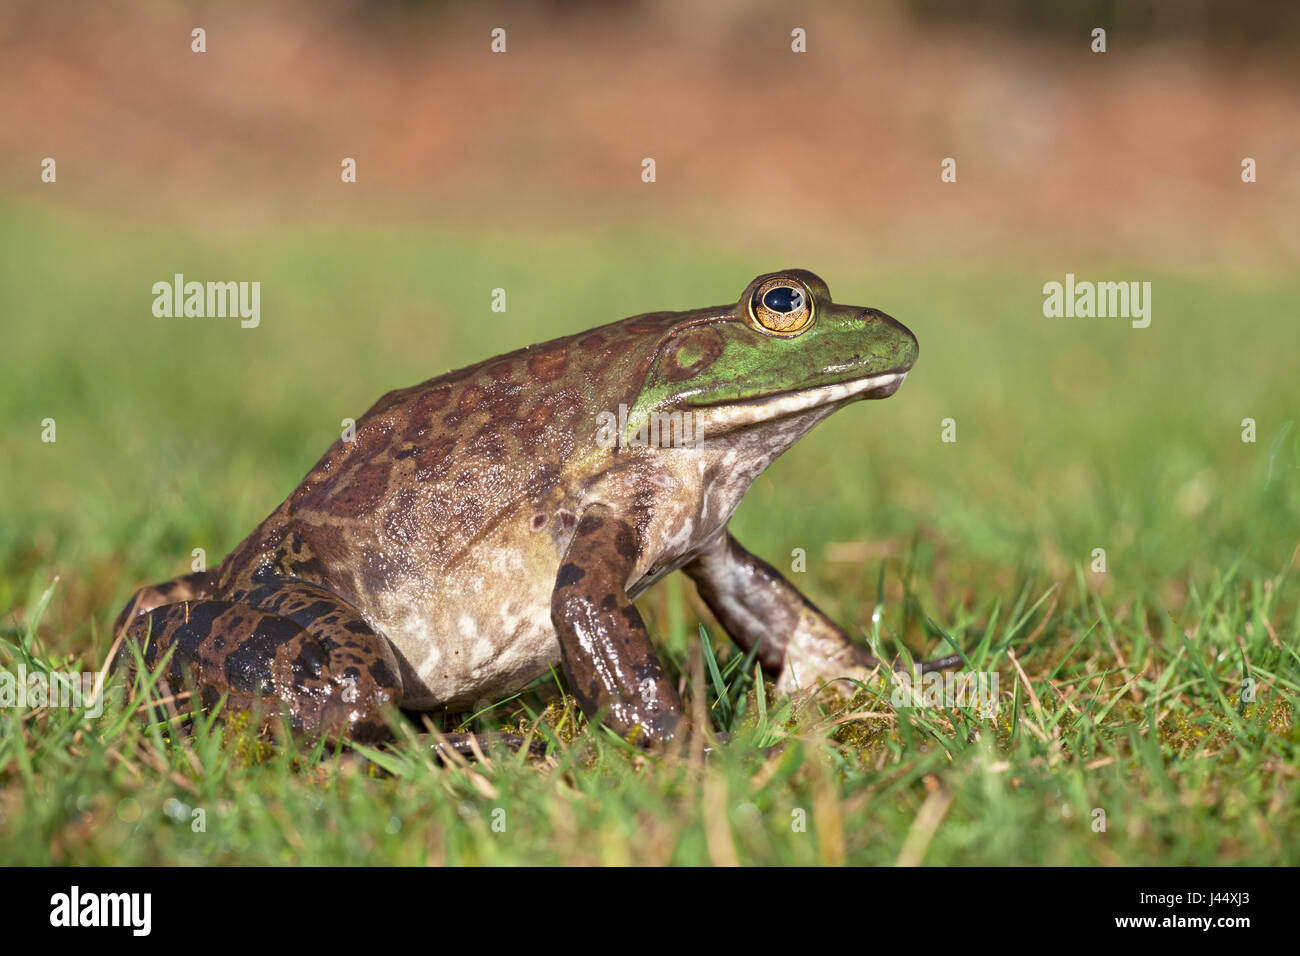 photo of a North American bullfrog on grass Stock Photo